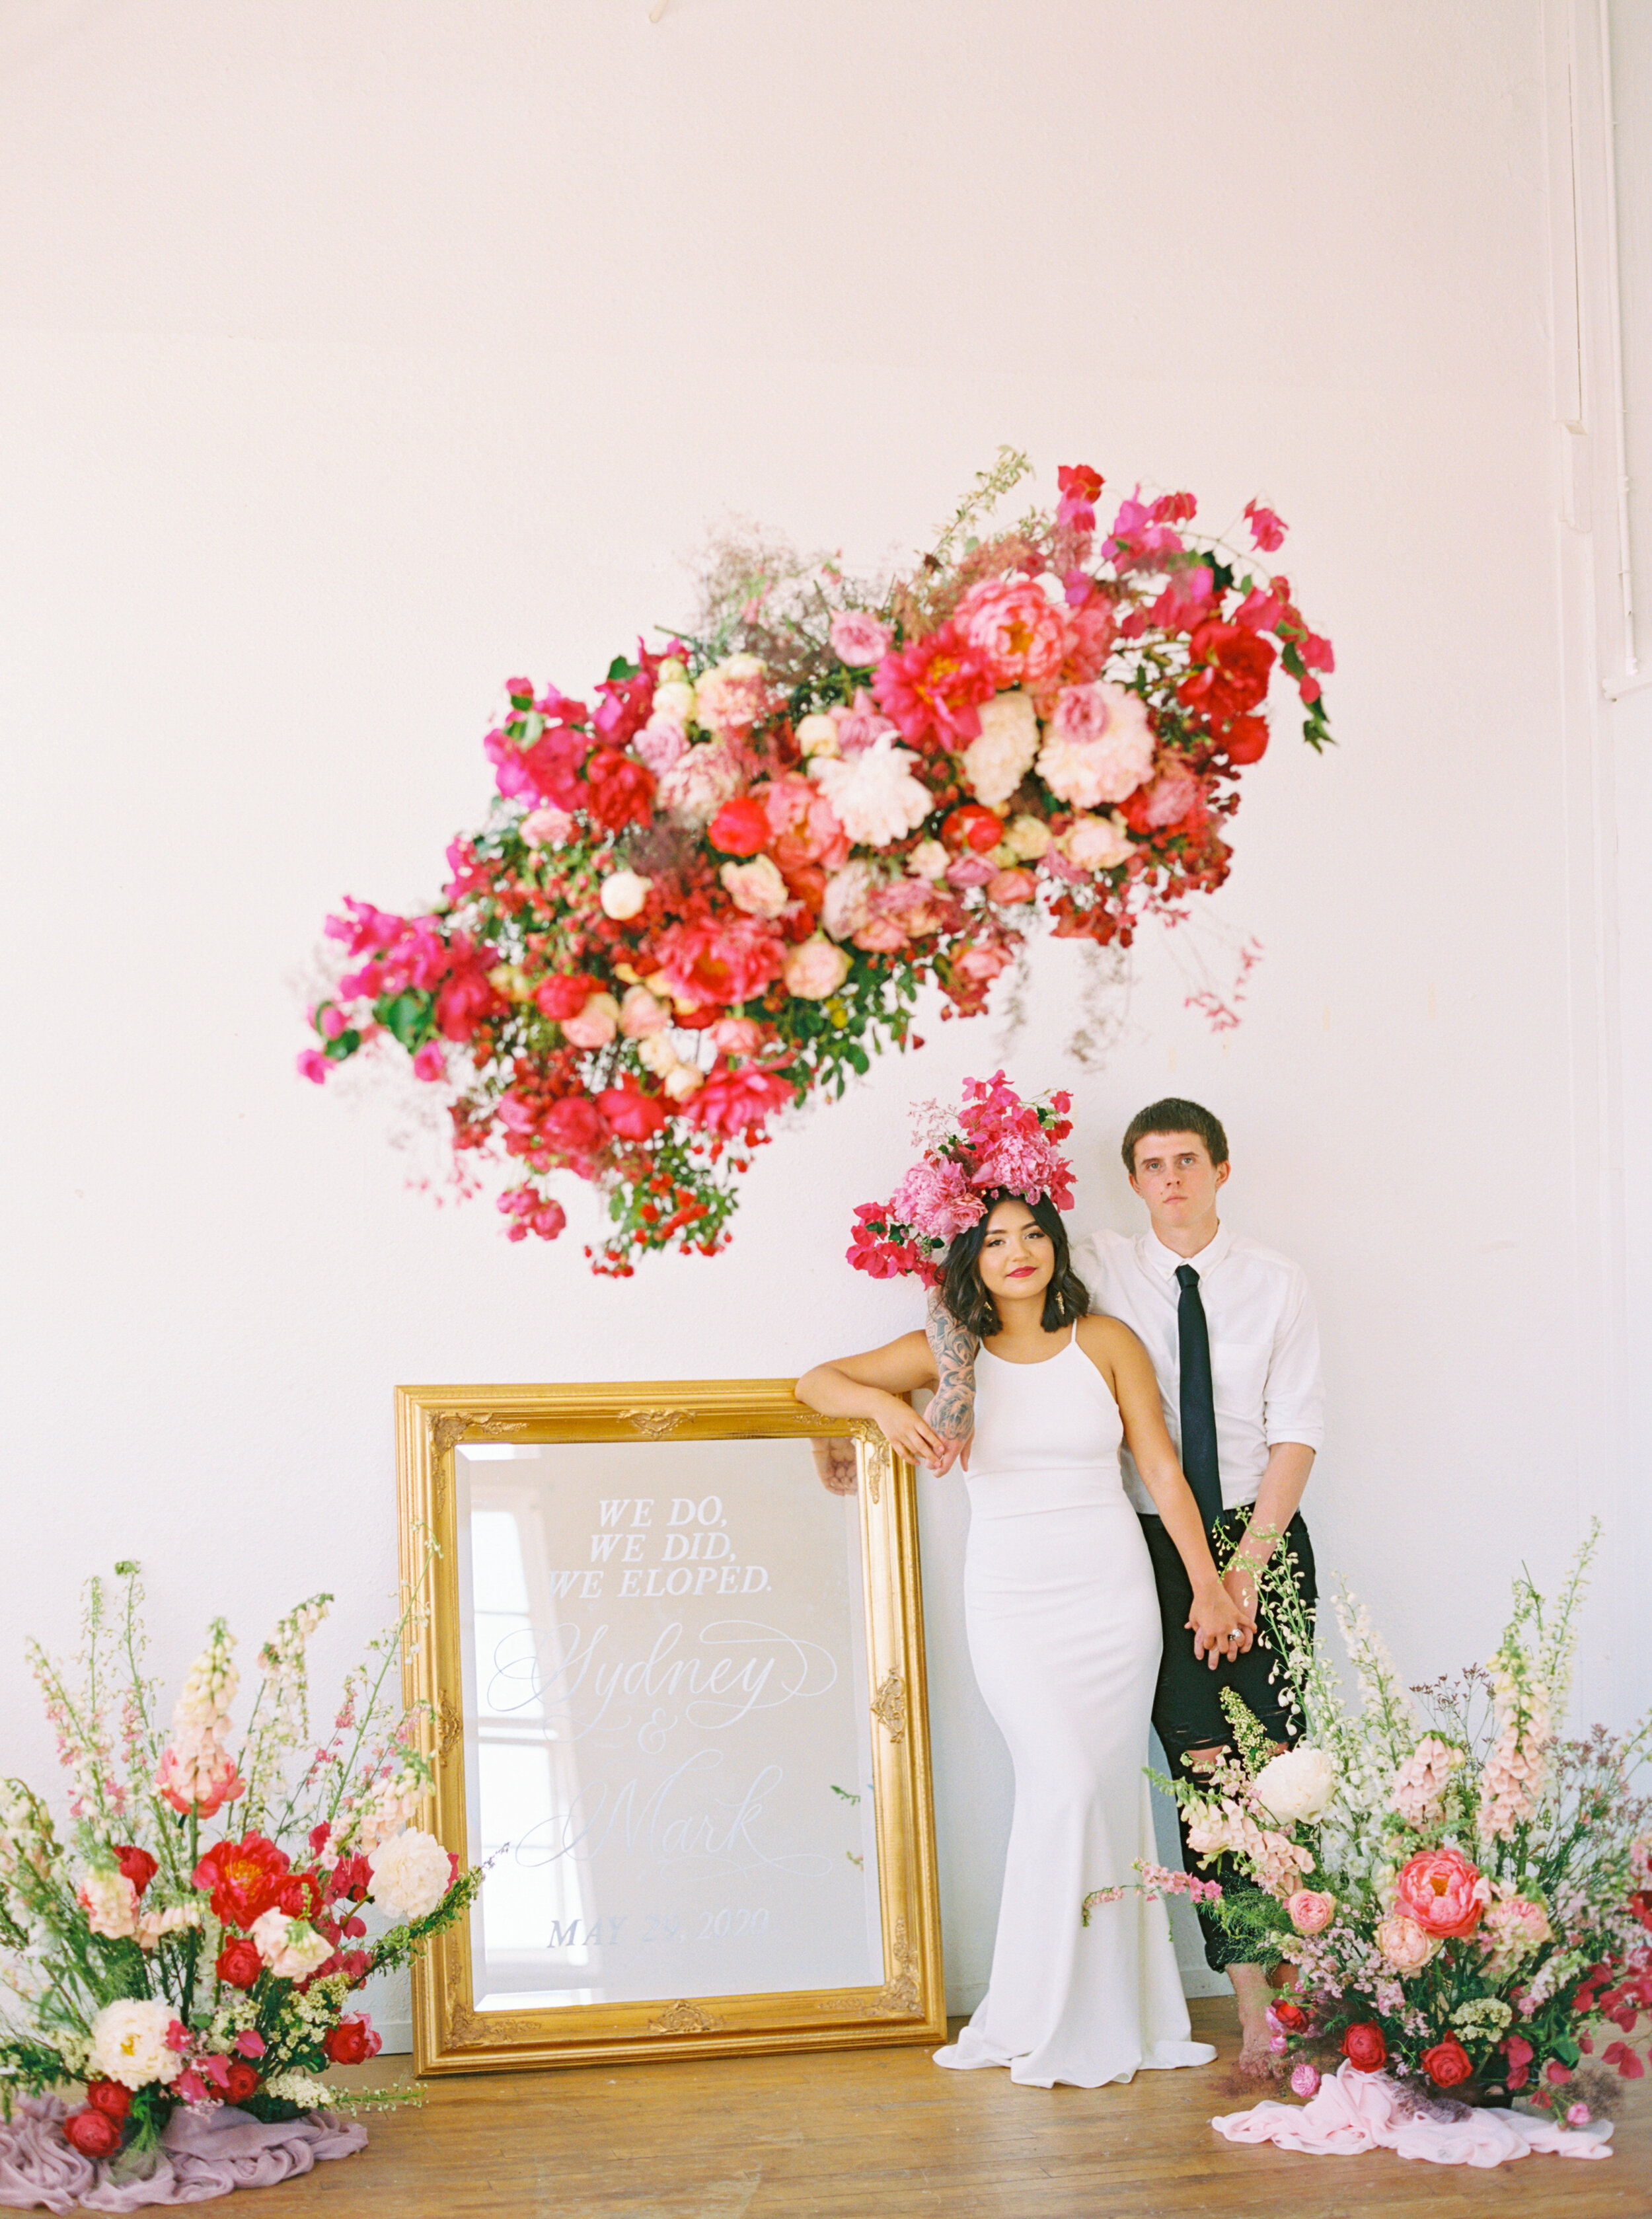 A Romantic Wedding Elopement Filled with Colorful Fuchsia - Sarahi Hadden Submission-119.jpg